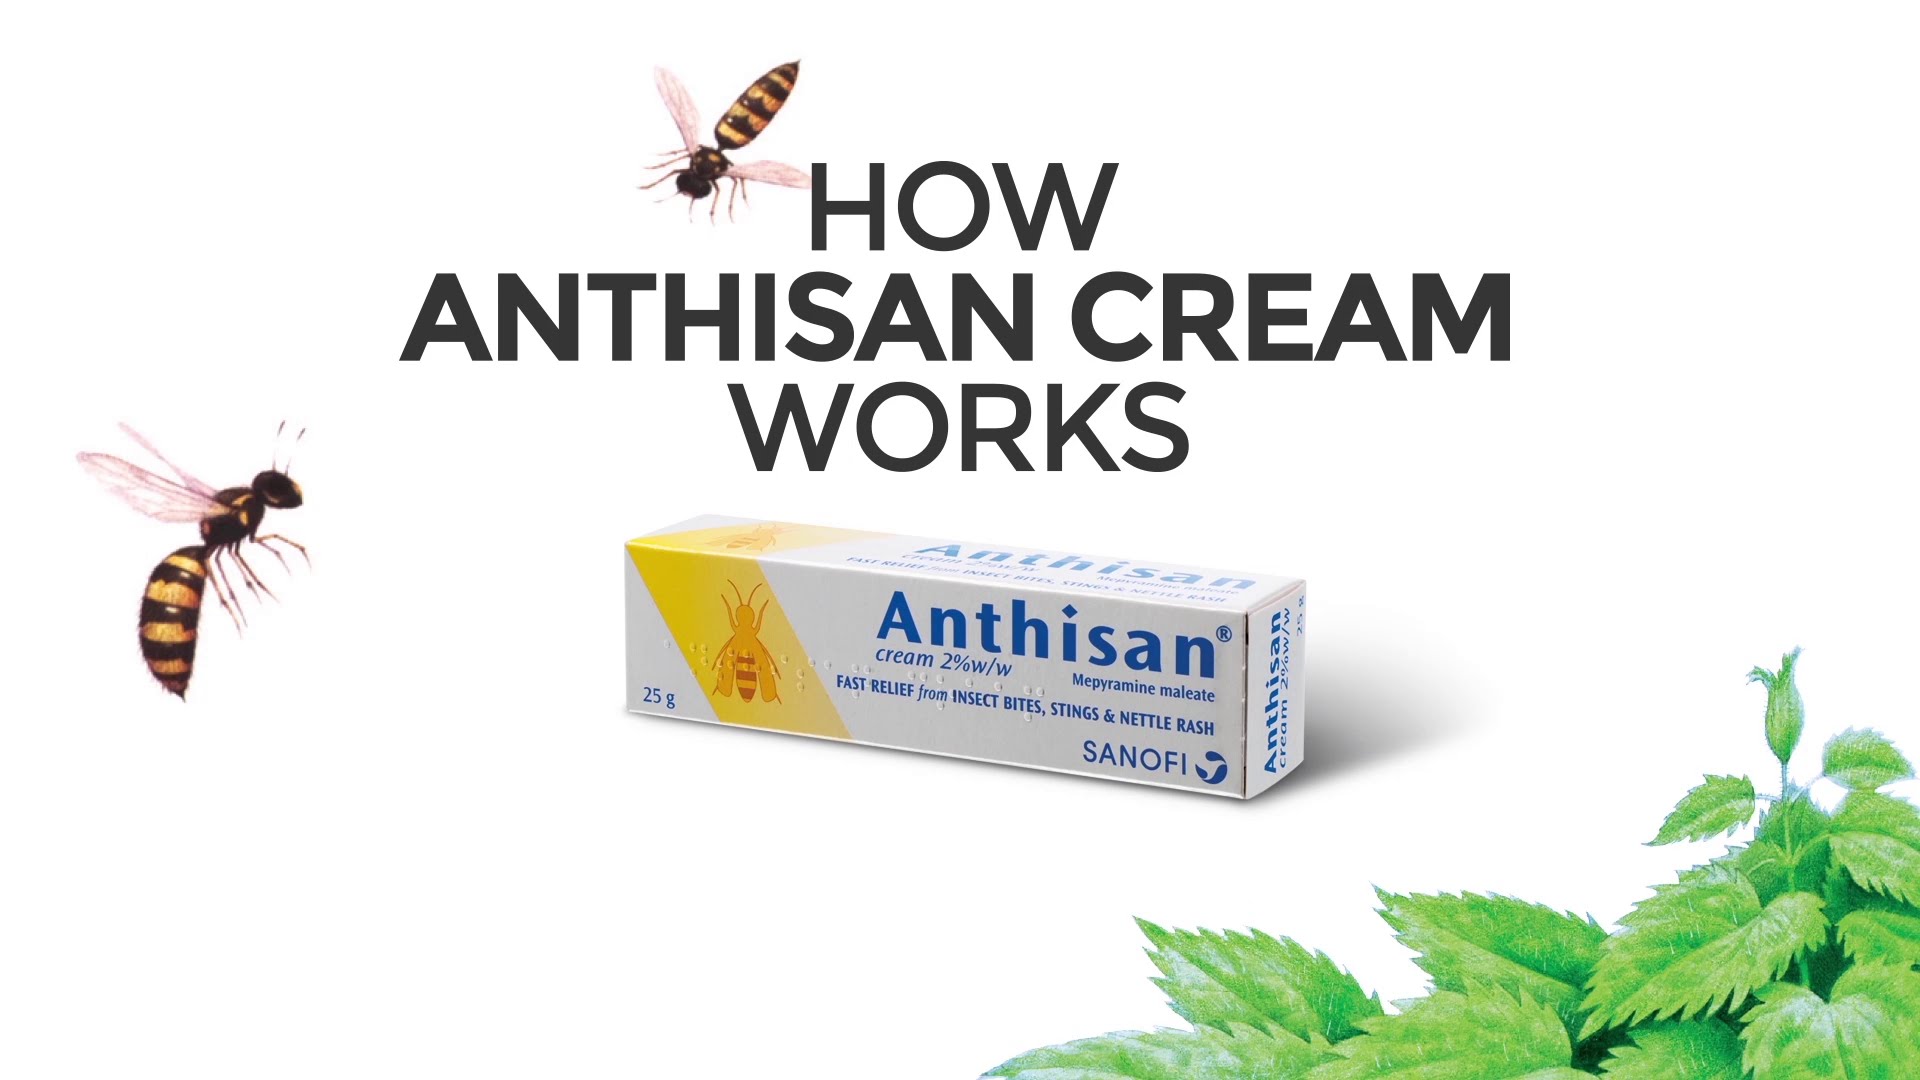 Anthisan Antihistamine Cream 25g provides effective and immediate relief from pain, itching and inflammation from insect bites, stings and nettle rash.